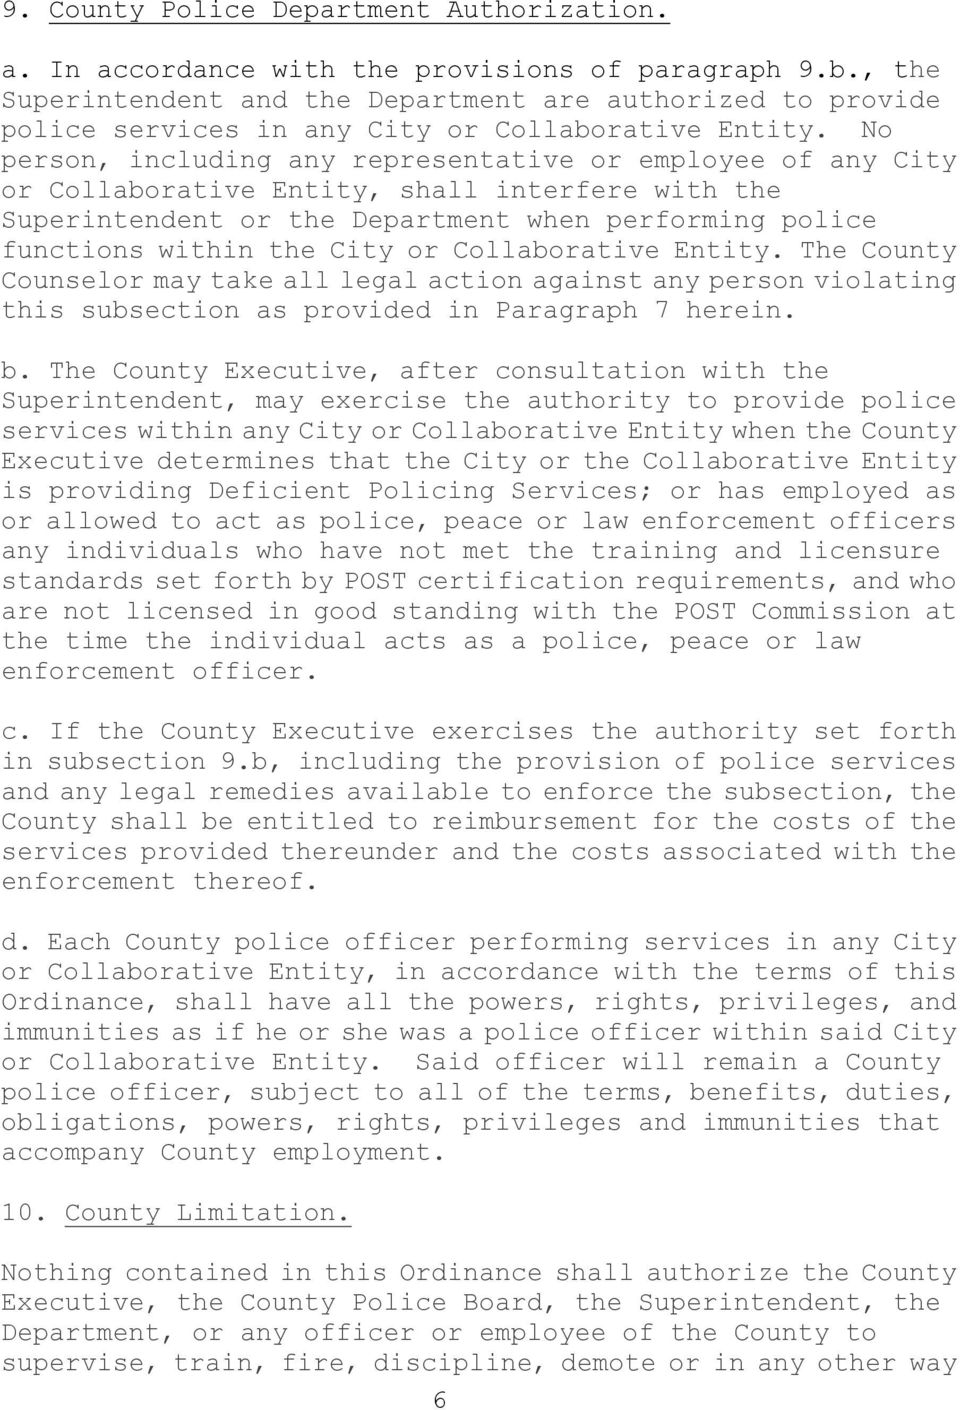 No person, including any representative or employee of any City or Collaborative Entity, shall interfere with the Superintendent or the Department when performing police functions within the City or